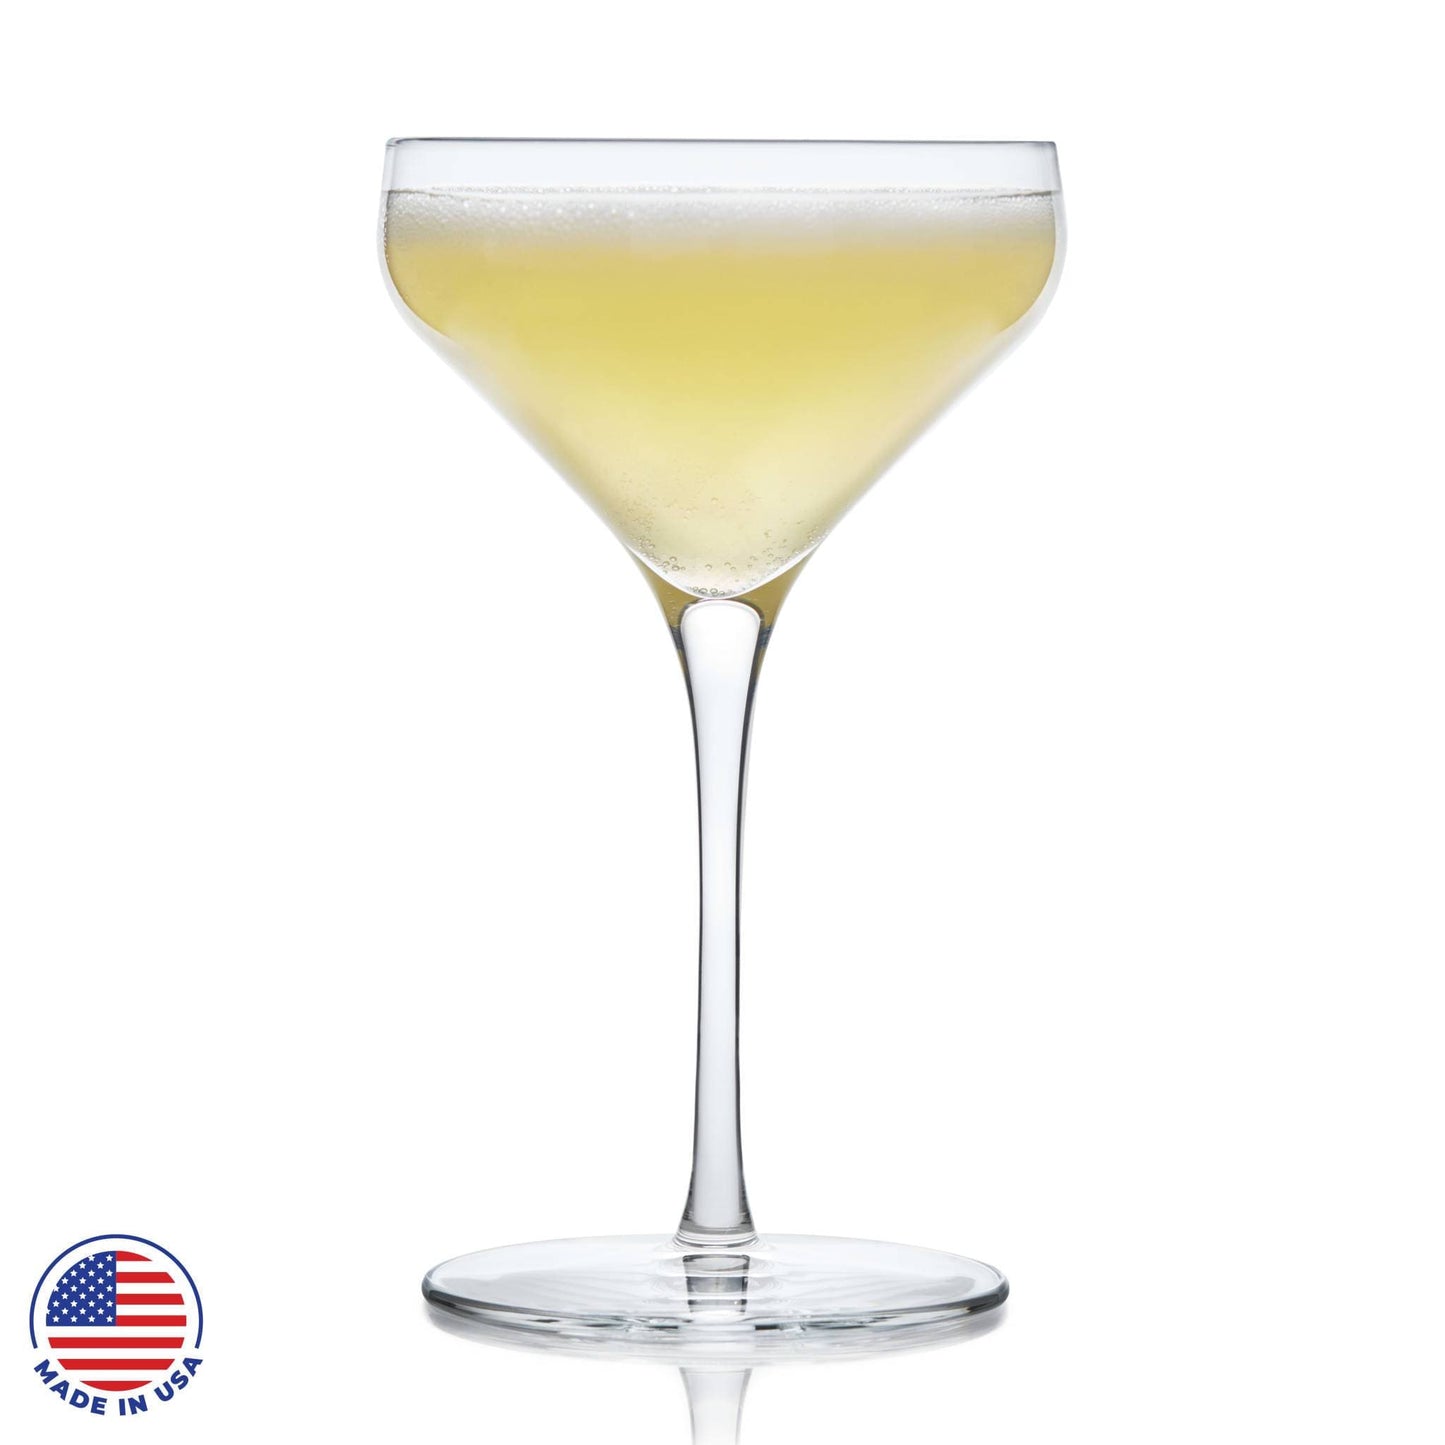 Libbey Signature Greenwich Coupe Cocktail Glass 8 oz